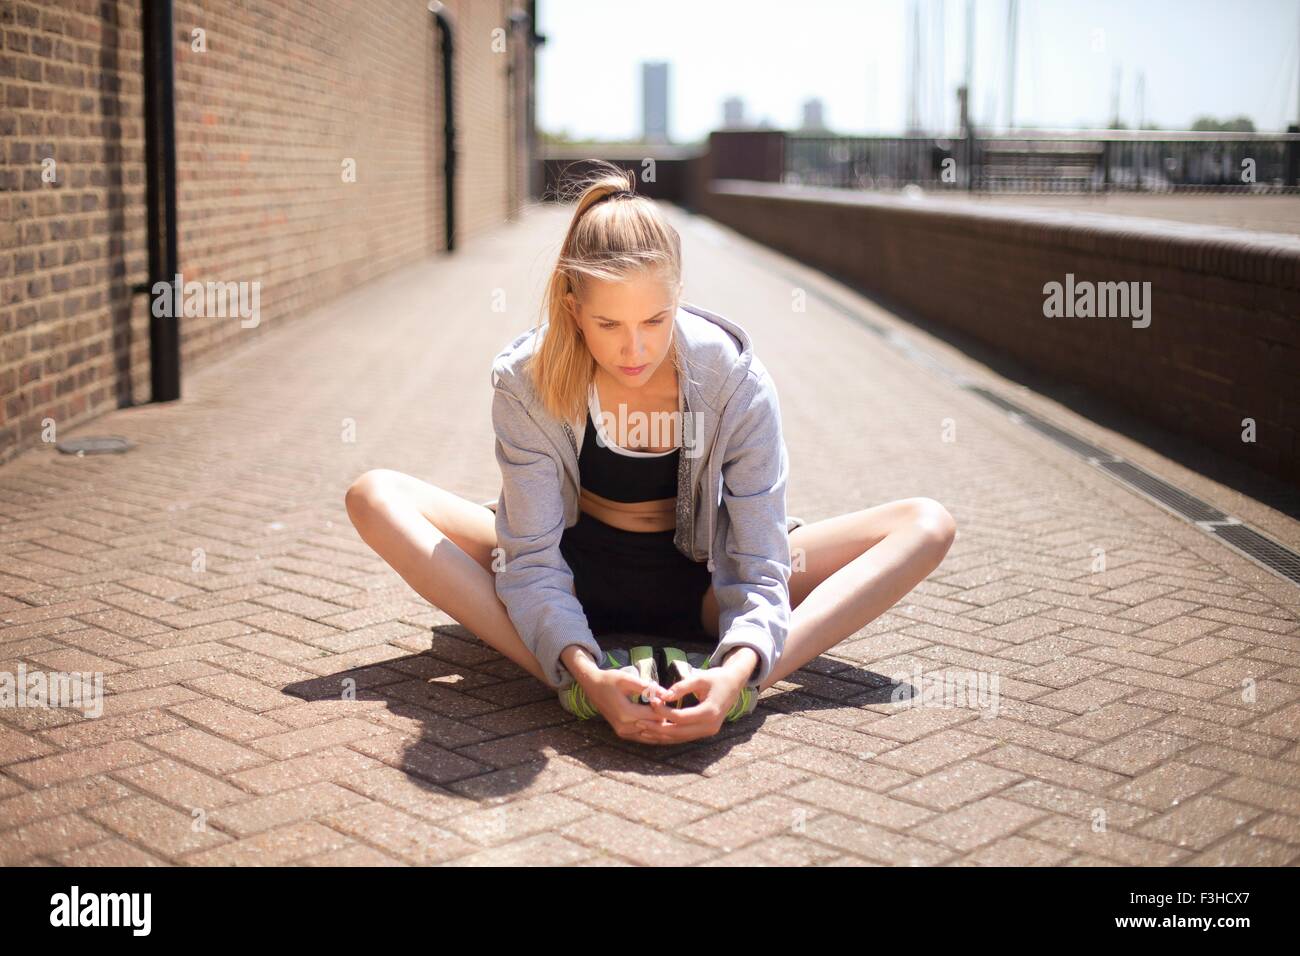 Runner stretching sur passerelle, Wapping, Londres Banque D'Images